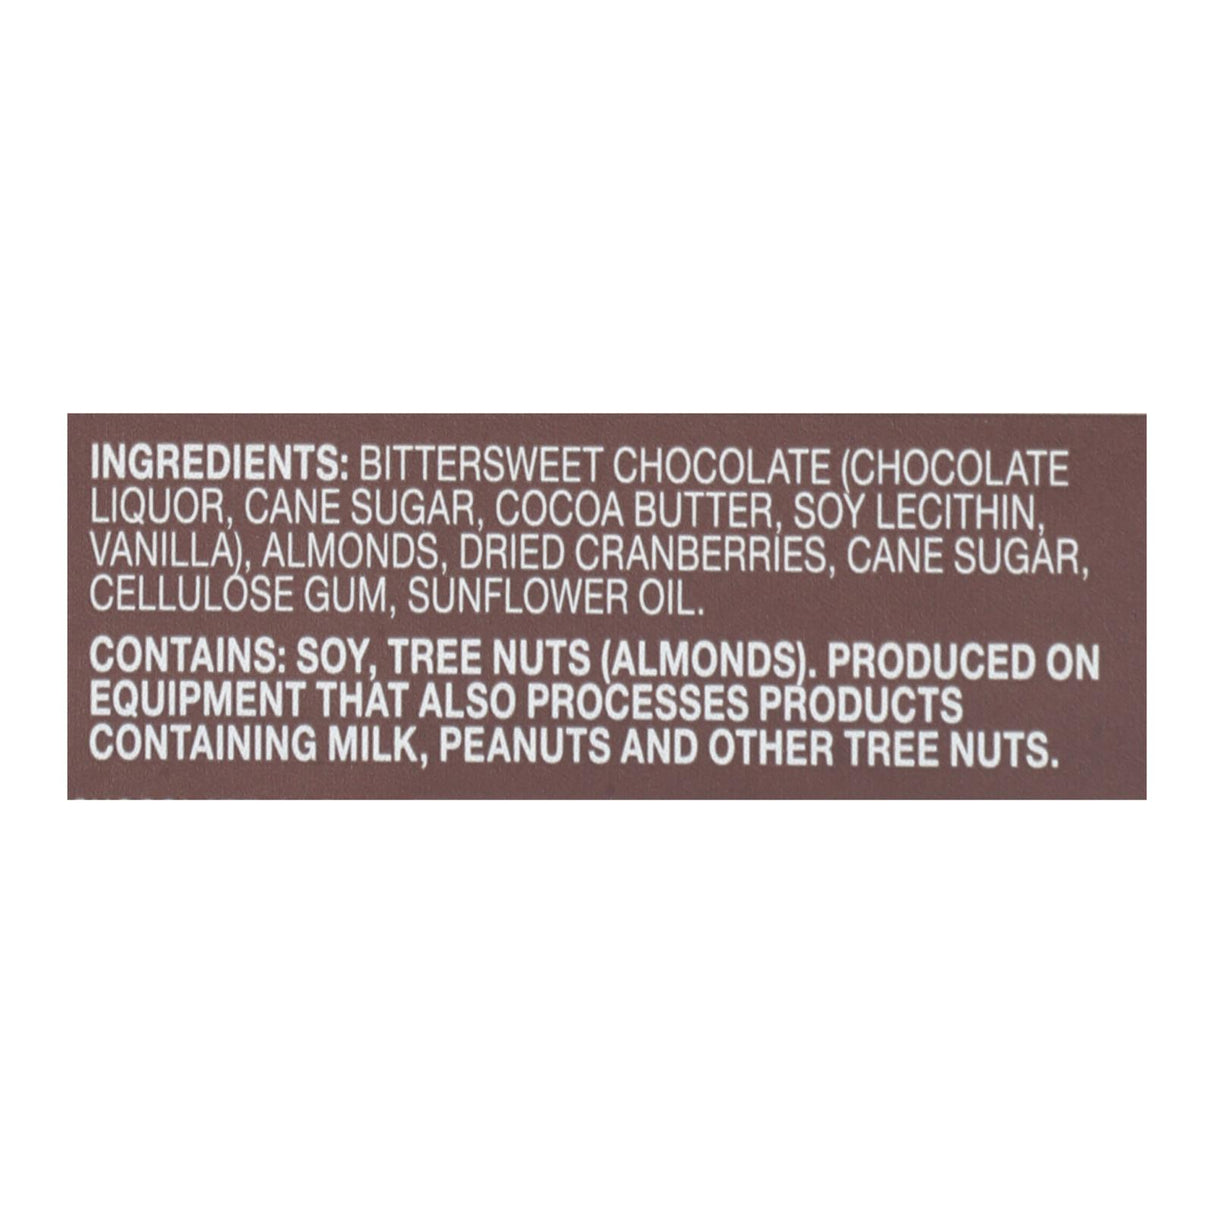 Endangered Species Dark Chocolate Bar - 72% Cocoa - Cranberries and Almonds - 3 Oz - Case of 12, Natural Chocolate Bars - Cozy Farm 